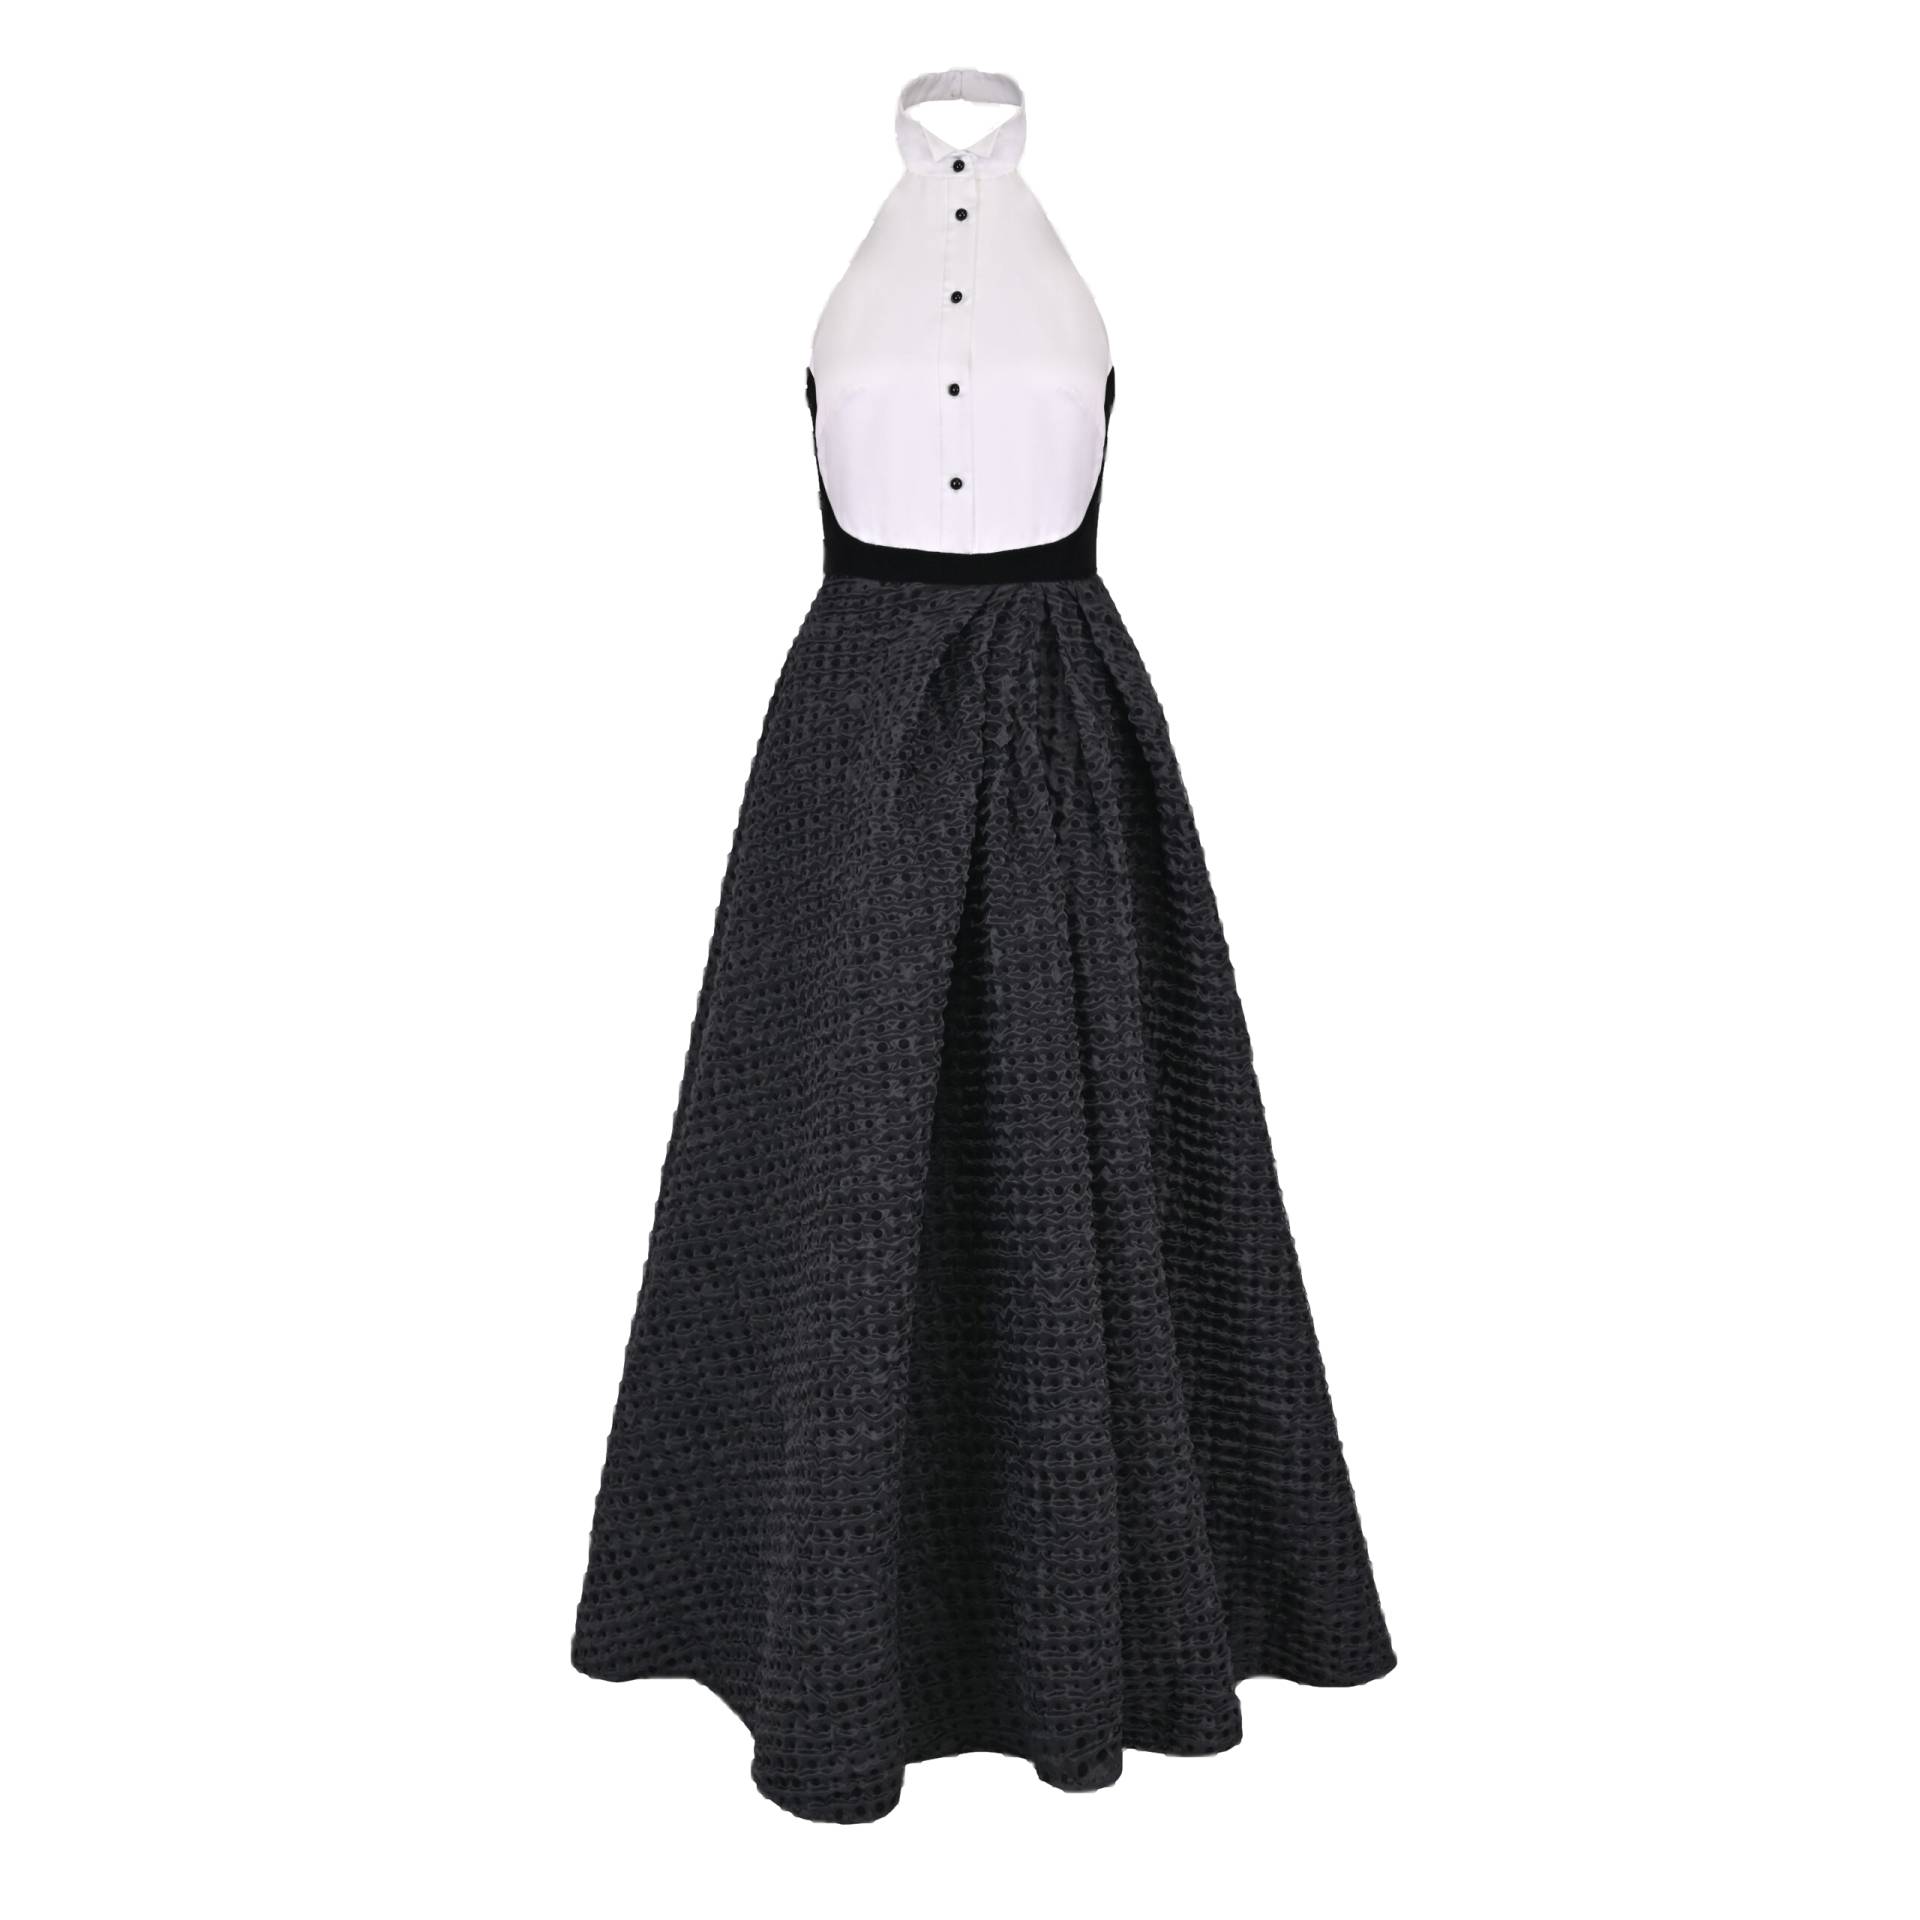 Elegant dress with a bow-tie collar von Lily Was Here